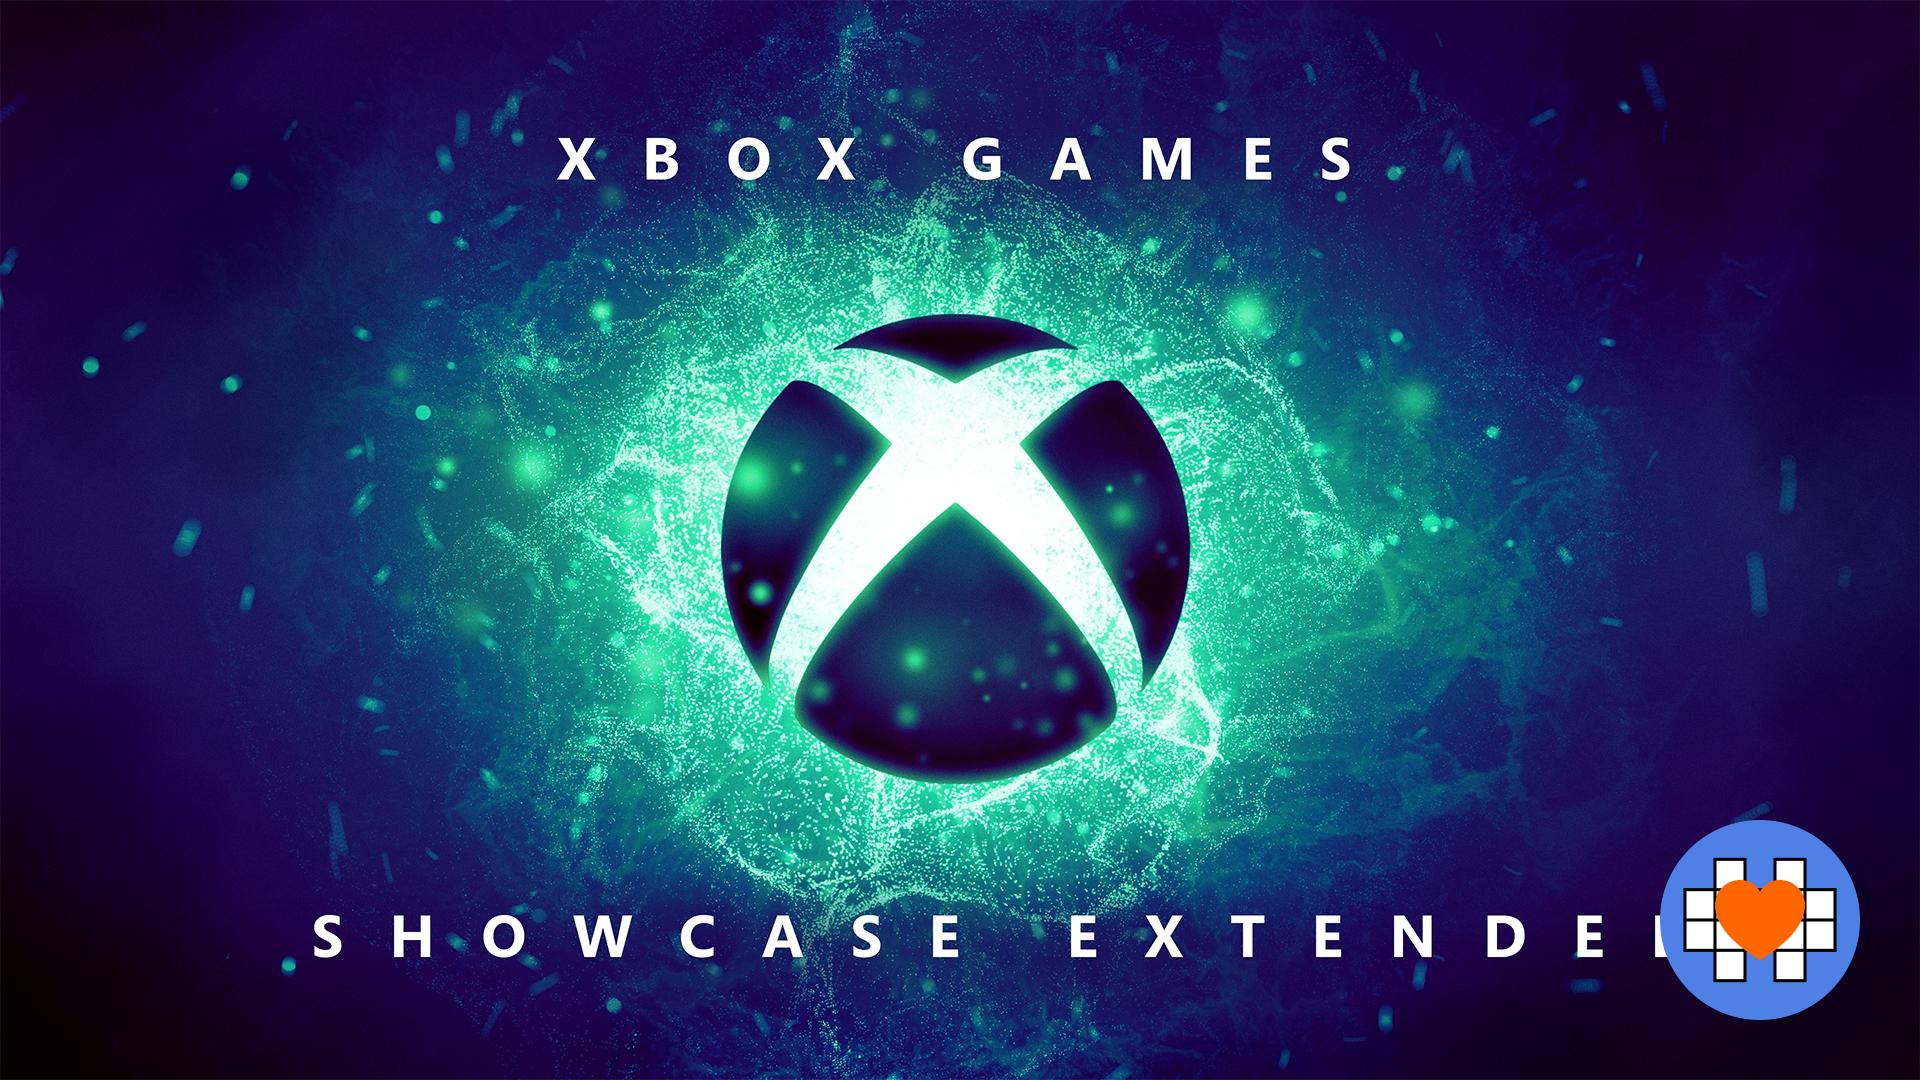 Starfield gameplay at Xbox Games Showcase promises freedom on a